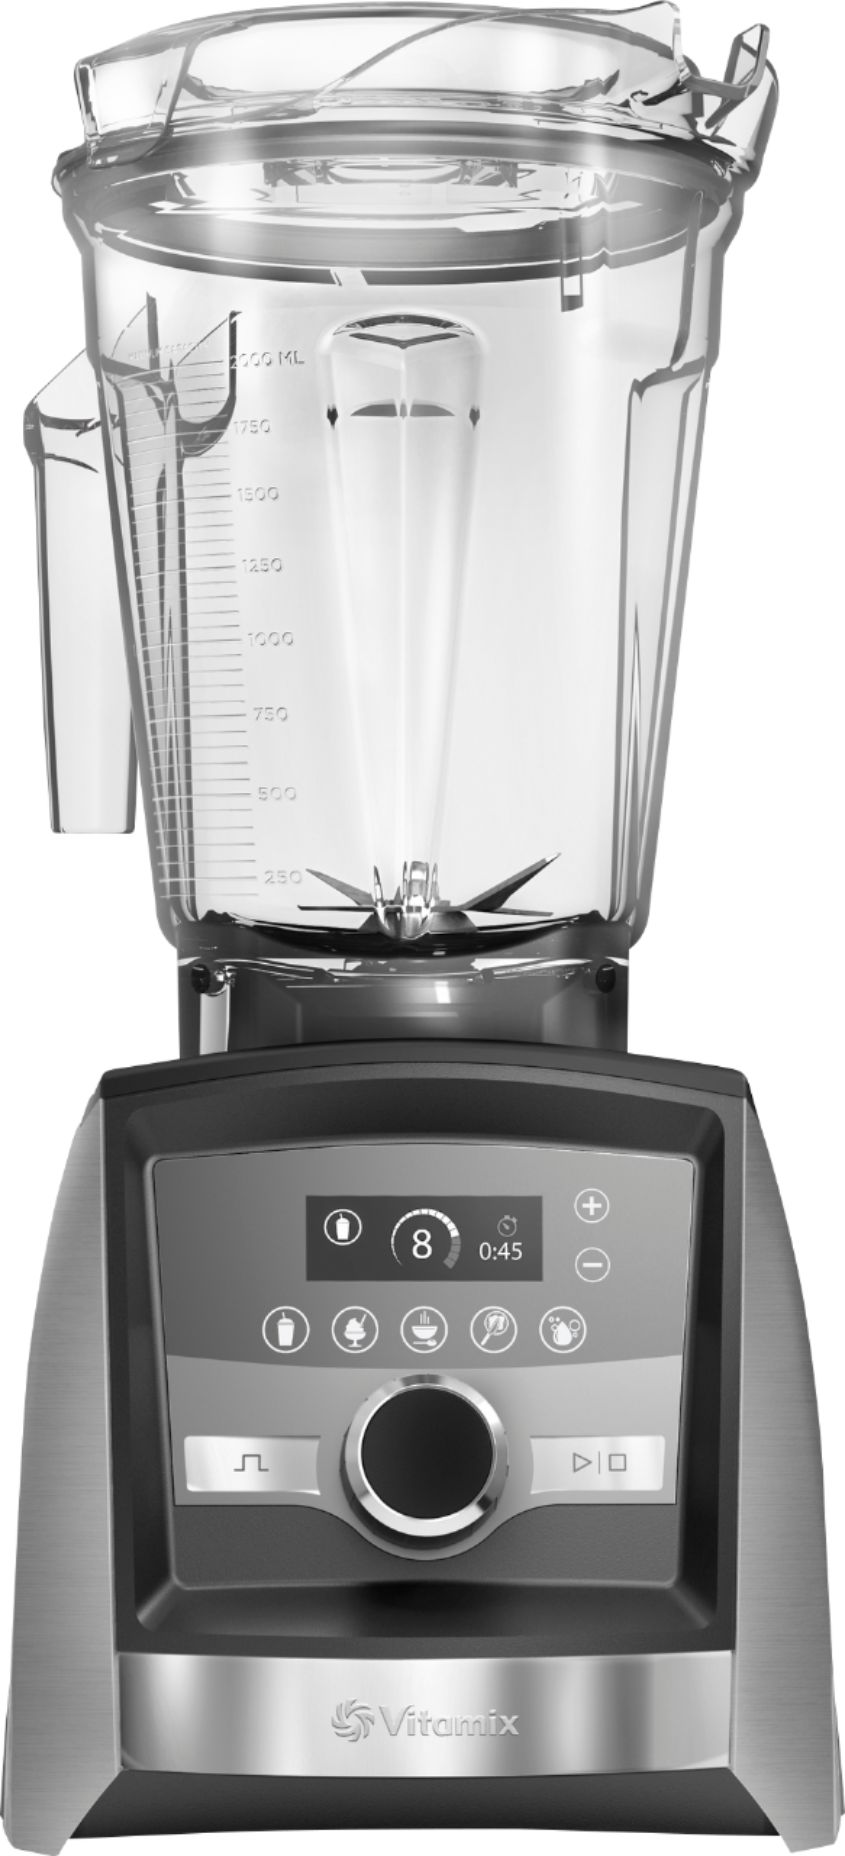 NEW Vitamix A3500 w/Stainless Steel Container Included! 